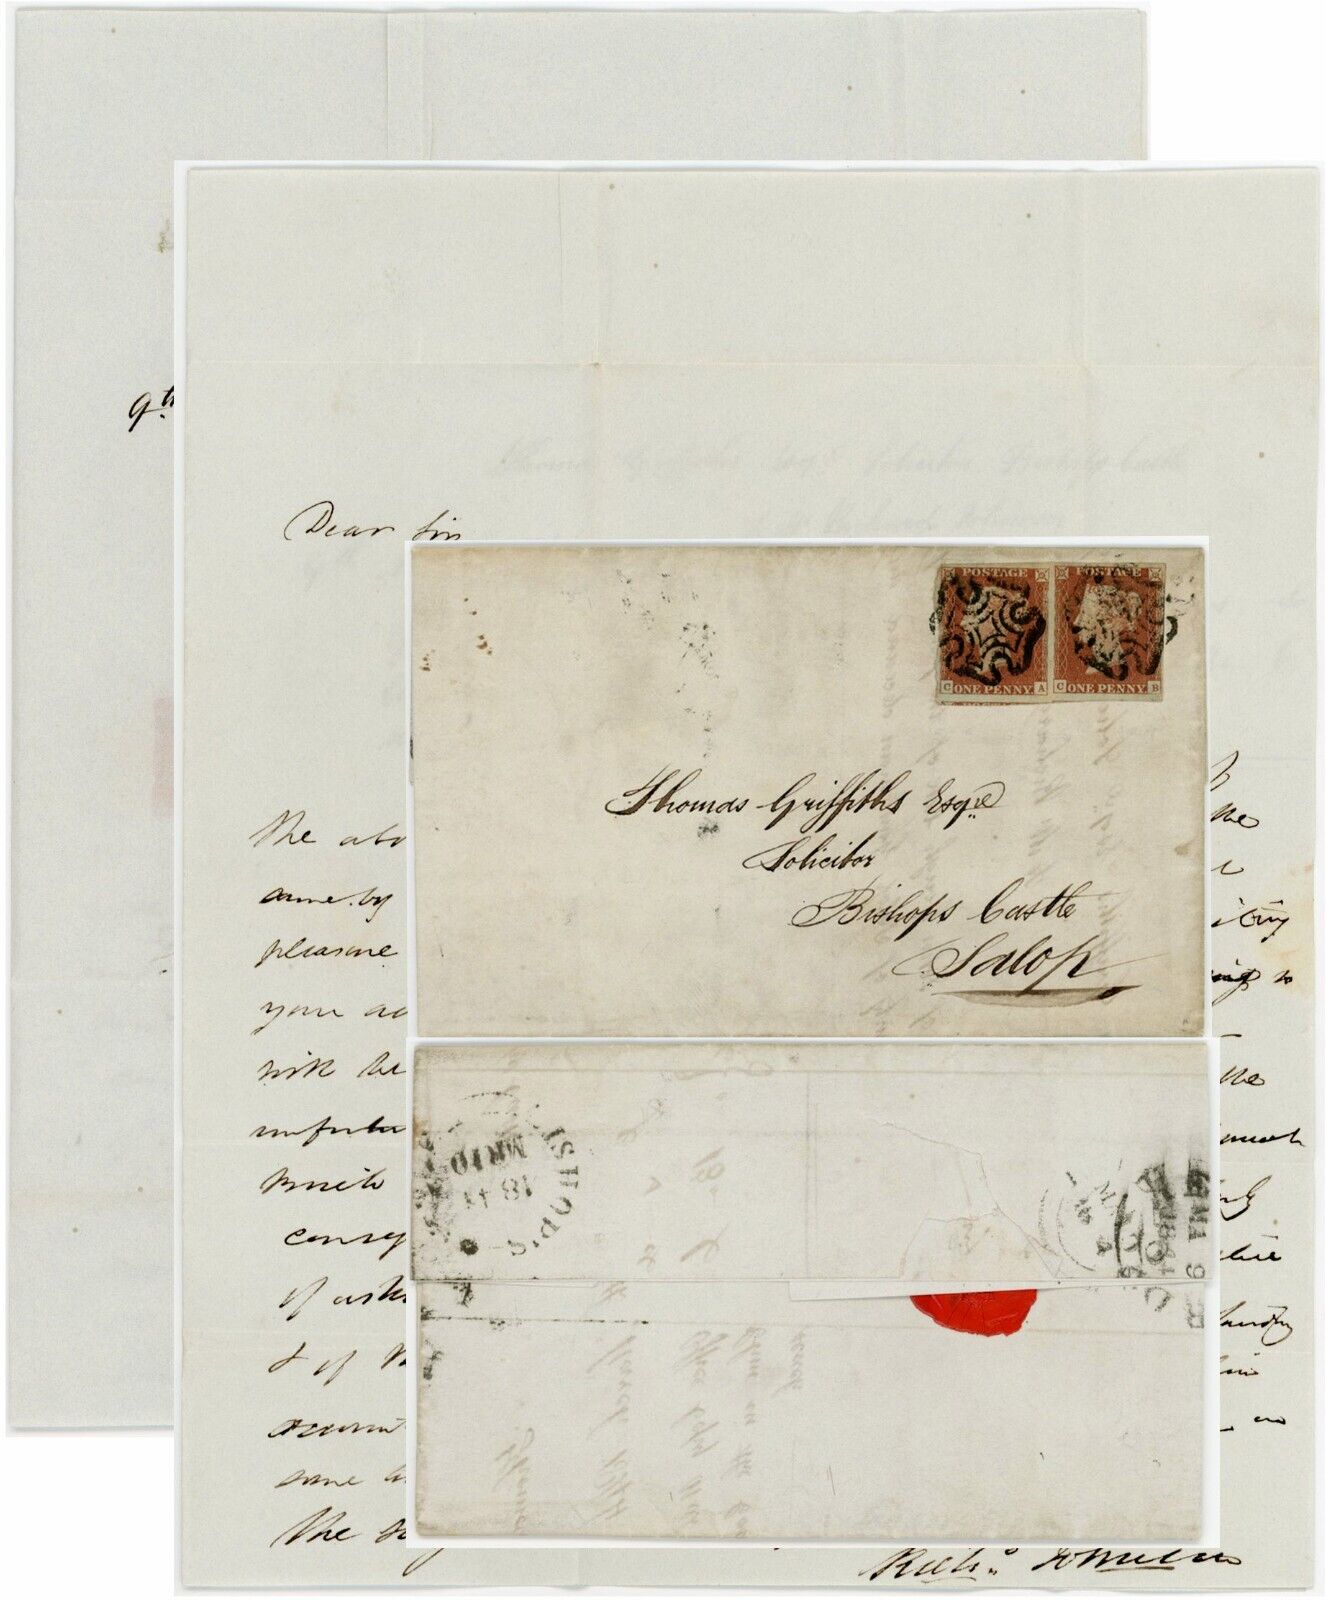 GB QV PENNY REDS PAIR MALTESE CROSS on 1844 LETTER to GRIFFITHS BISHOPS CASTLE